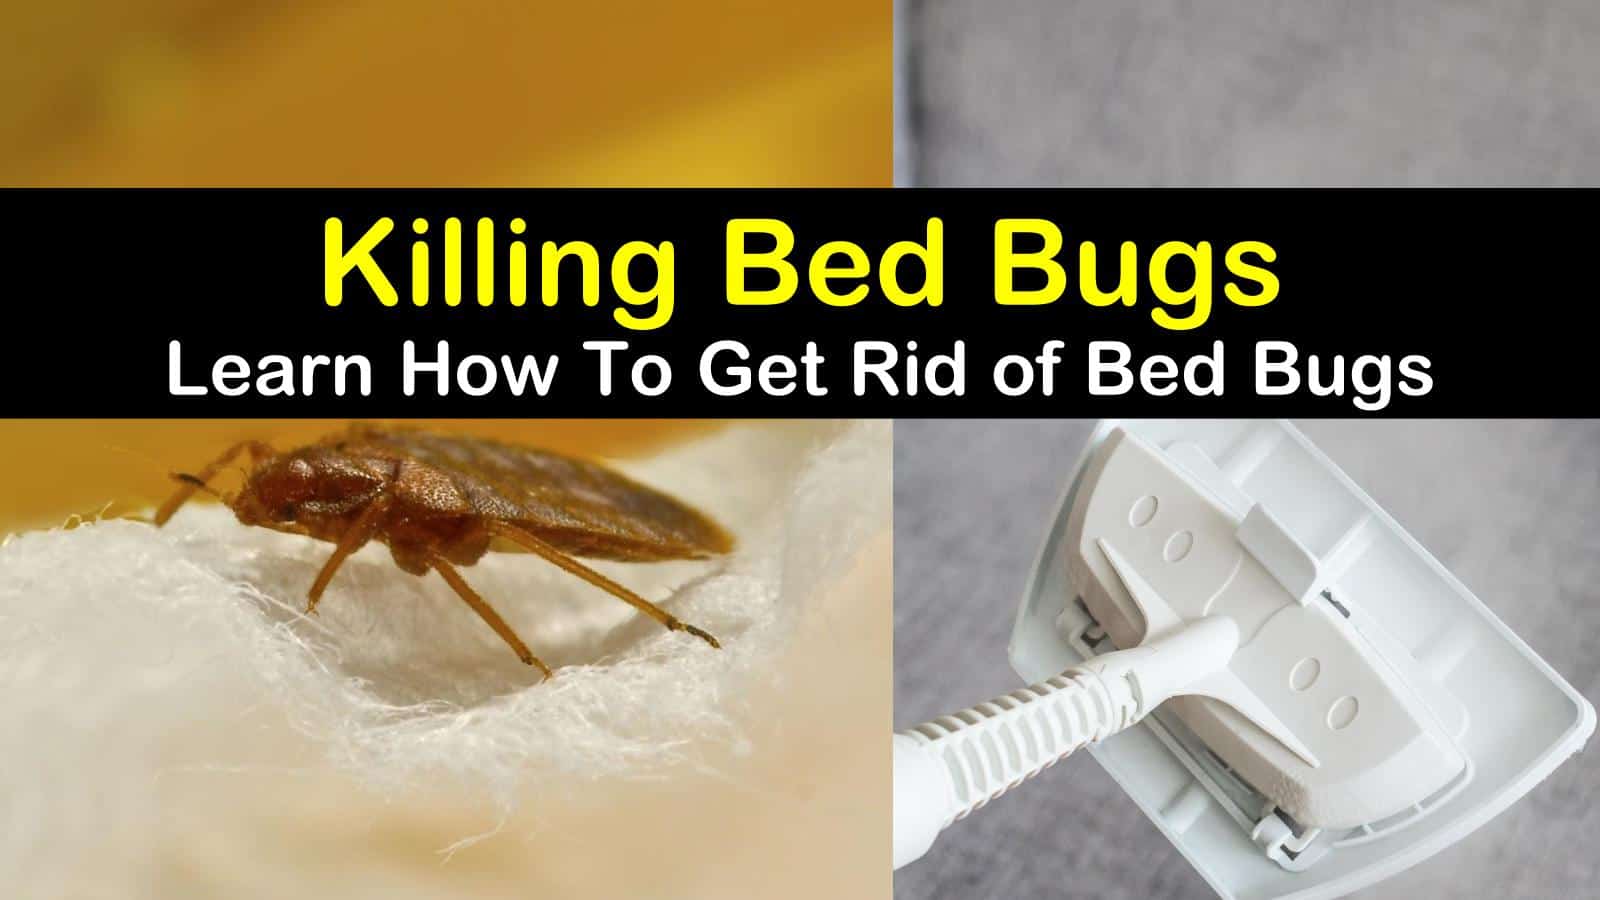 Adhere these methods to get rid of bed bugs